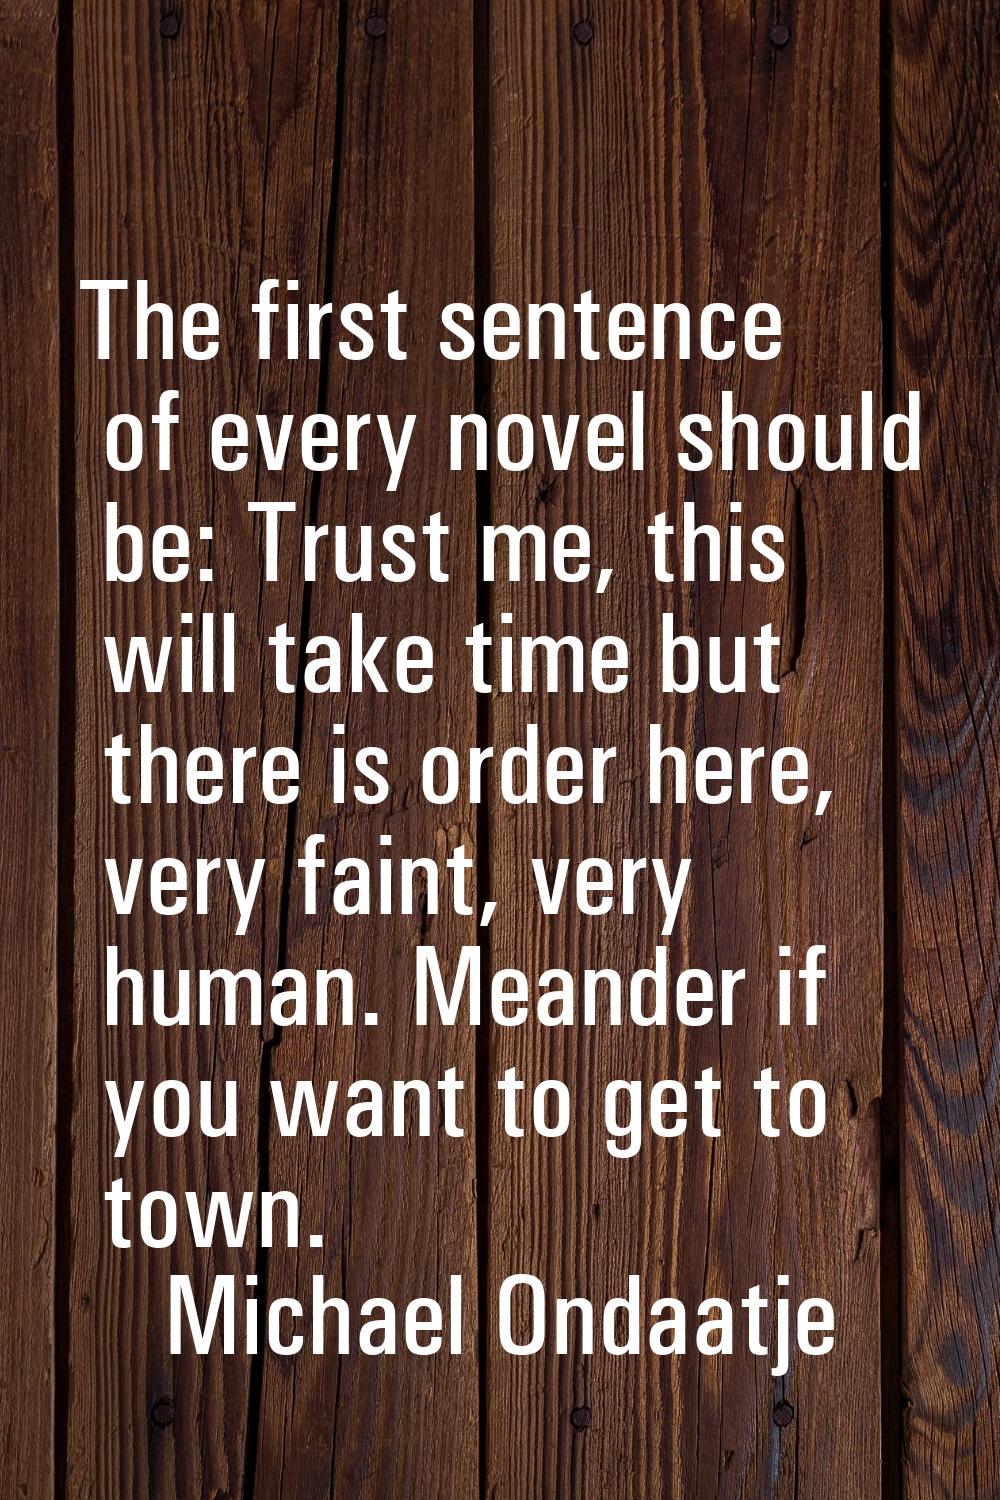 The first sentence of every novel should be: Trust me, this will take time but there is order here,